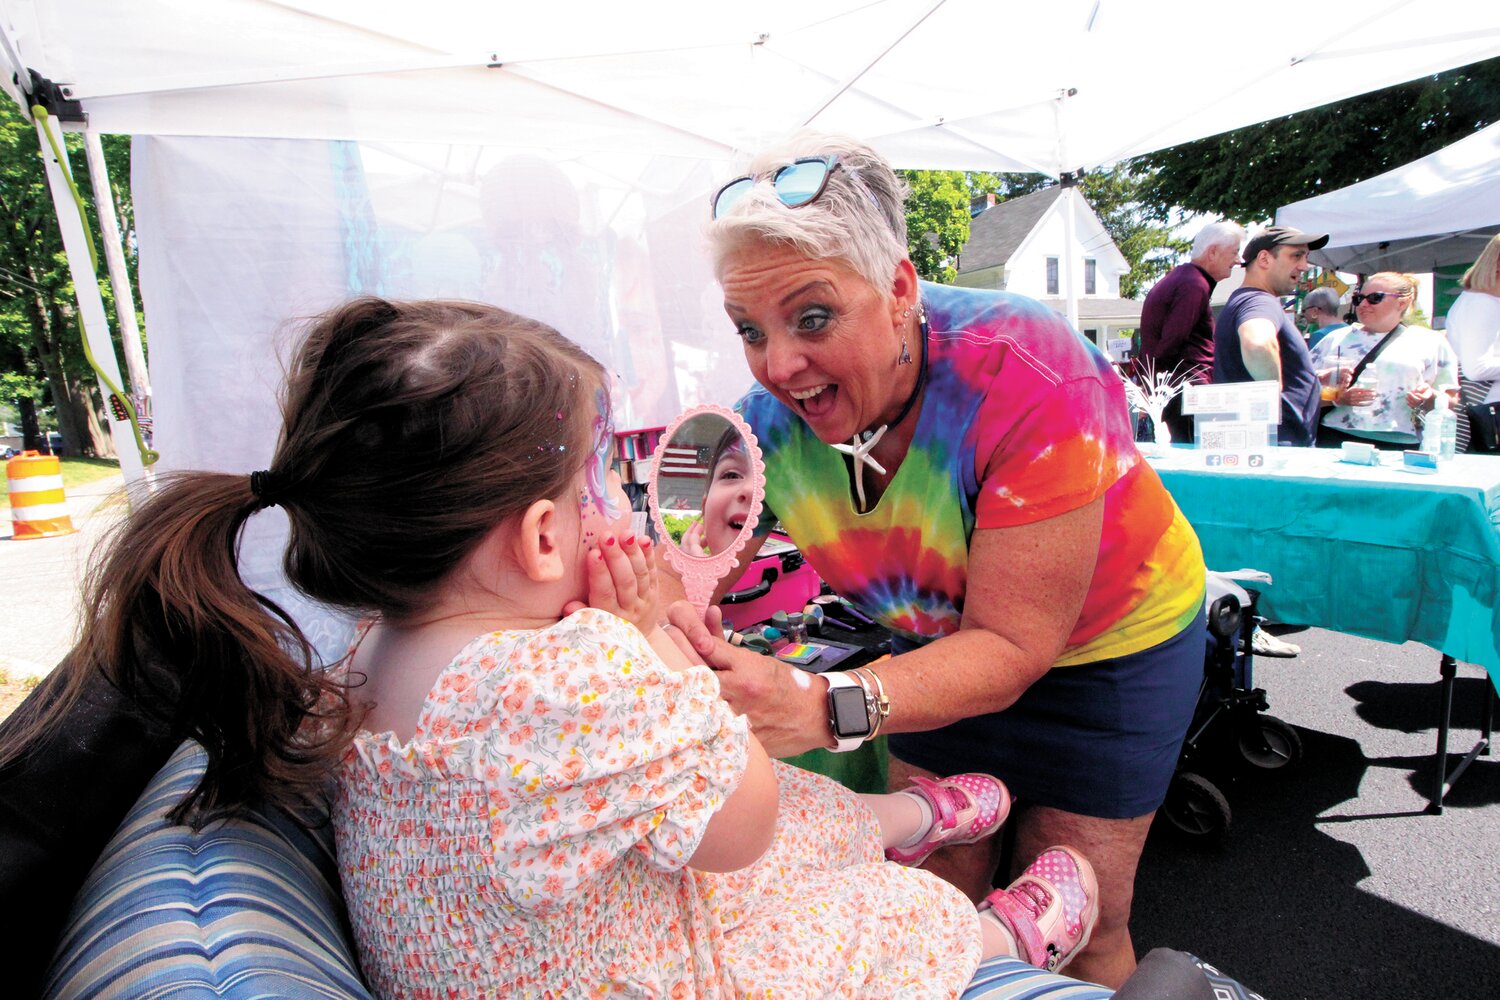 ALWAYS POPULAR: Toni Andersen of Warwick  barely paused from the moment the Gaspee Days Arts and Crafts officially opened Saturday morning. Her face paintings delighted kids of all ages including Violet who is pictured here. As typically the case, parents ask how they wash faces clean and kids protest when they learn they won’t last .